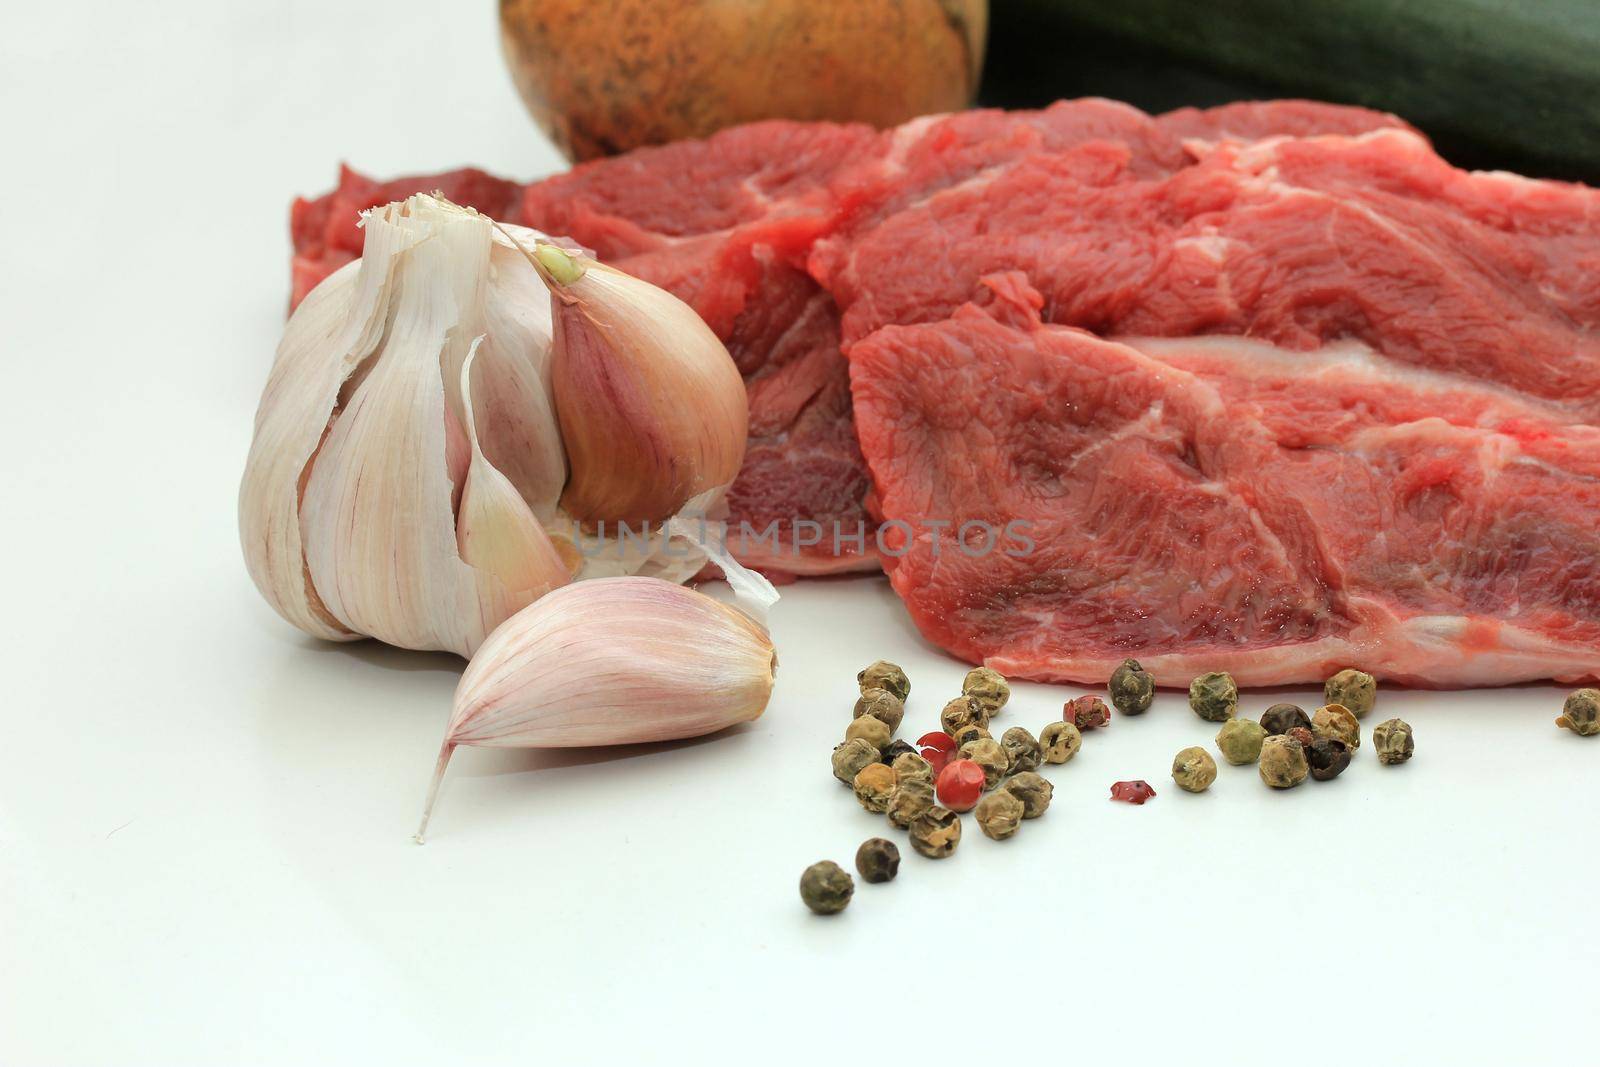 Raw beef, some garlic and mixed pepper